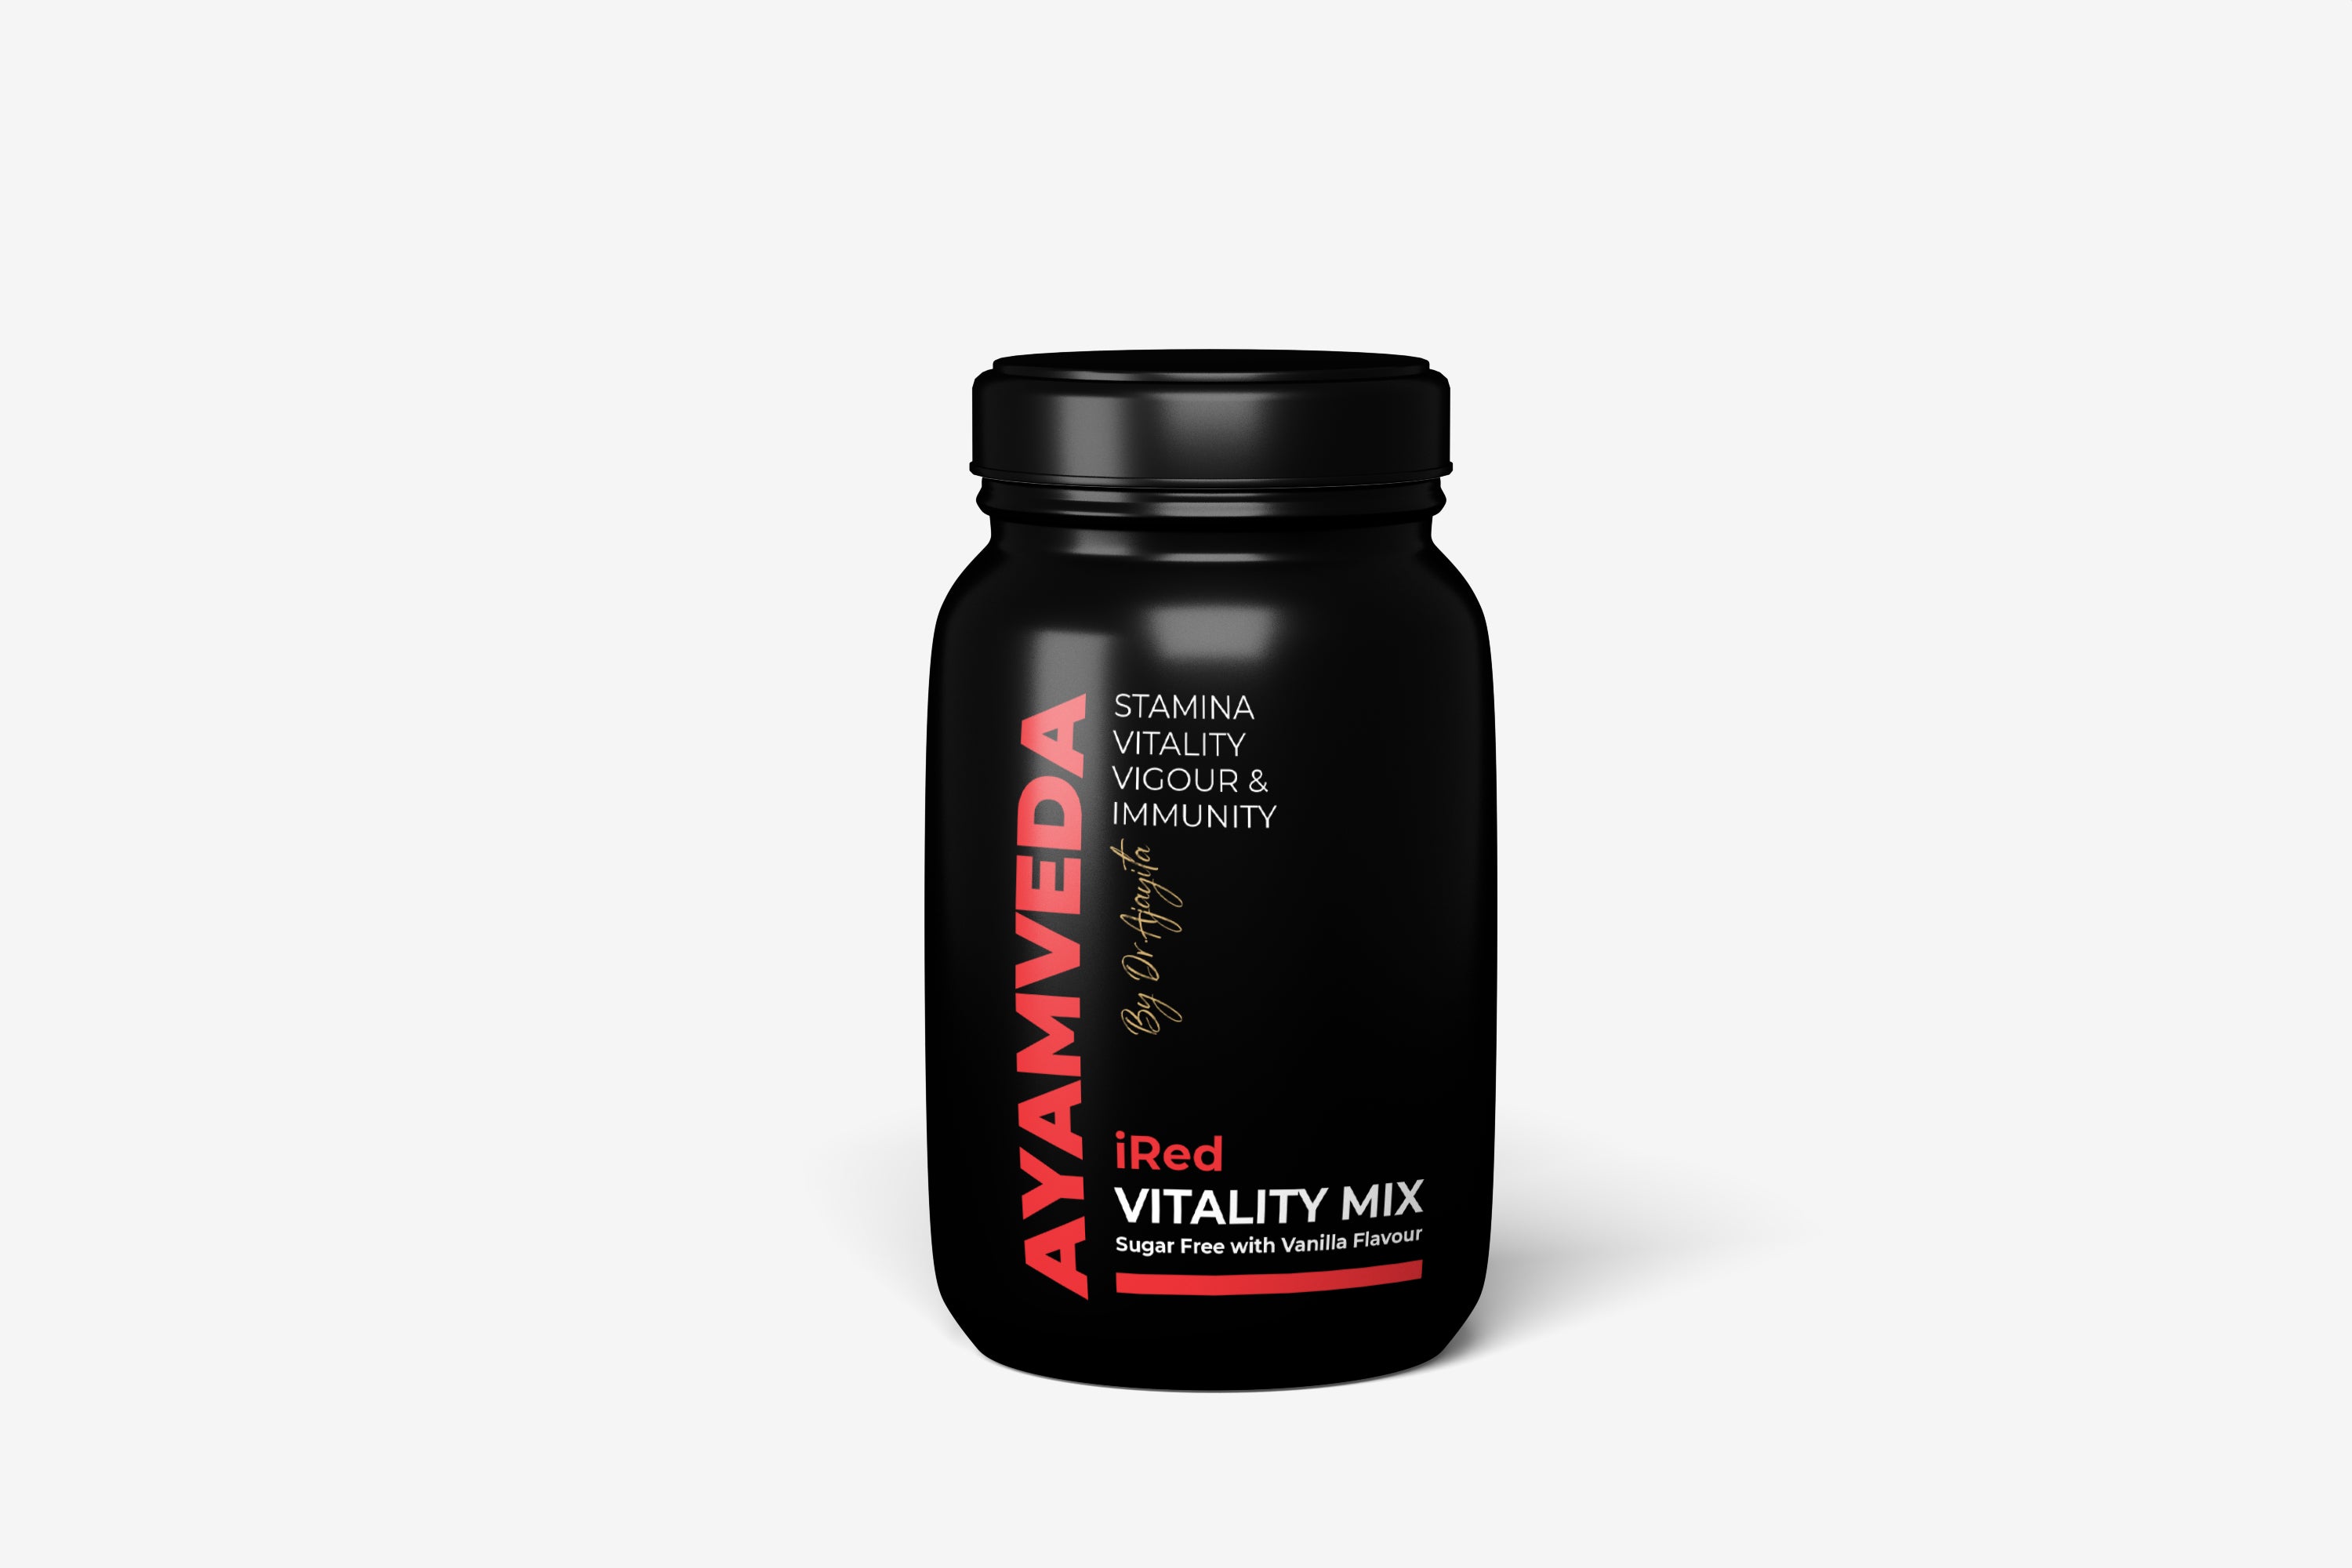 Dr. Ajayita's iRed Vitality Mix